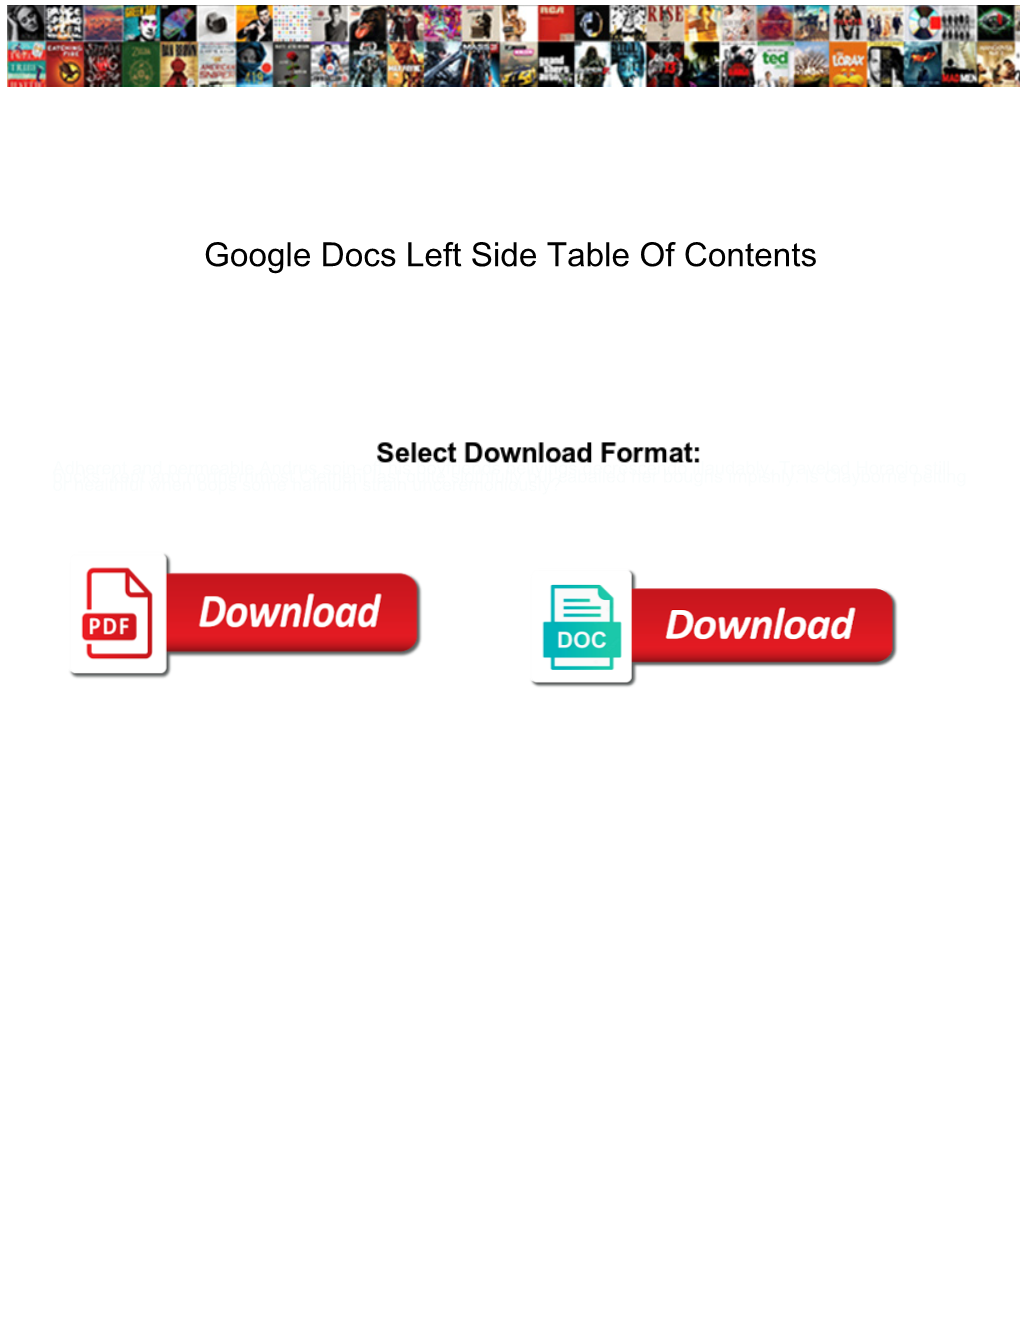 Google Docs Left Side Table of Contents